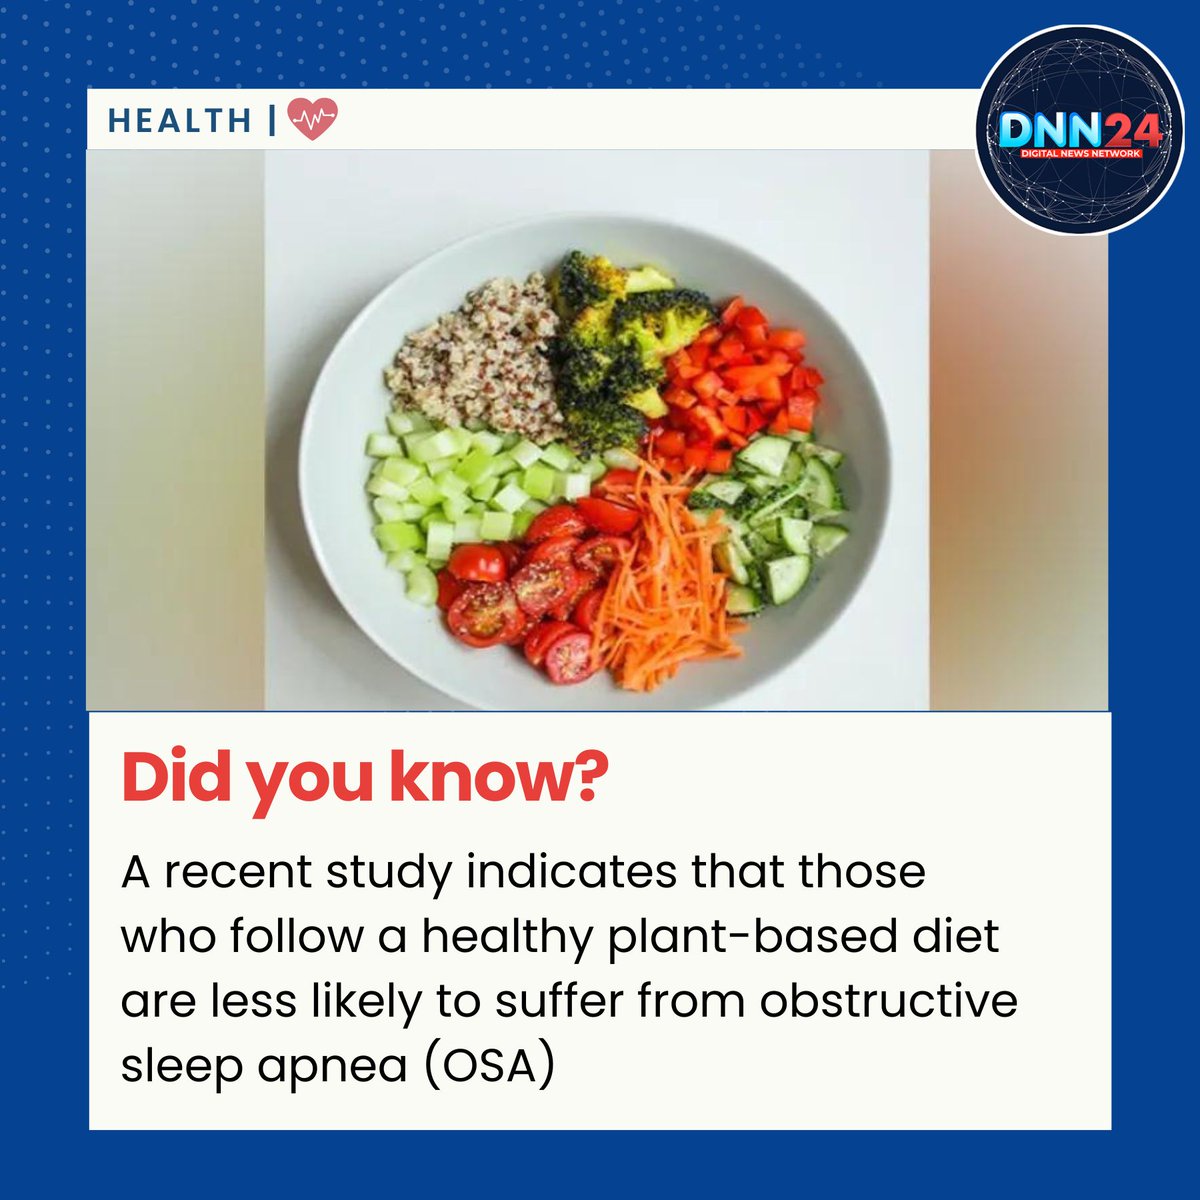 Your dietary choices could impact your sleep health! 

To know more click on the link➡️awazthevoice.in/lifestyle-news…

#HealthTips #HealthUpdate #FoodSuppliment #ObstructiveSleepApnea #Harmony #Brotherhood #NationalIntegrity #Peace #DNN24 #AwazTheVoice
@MoHFW_INDIA @AwazThevoice